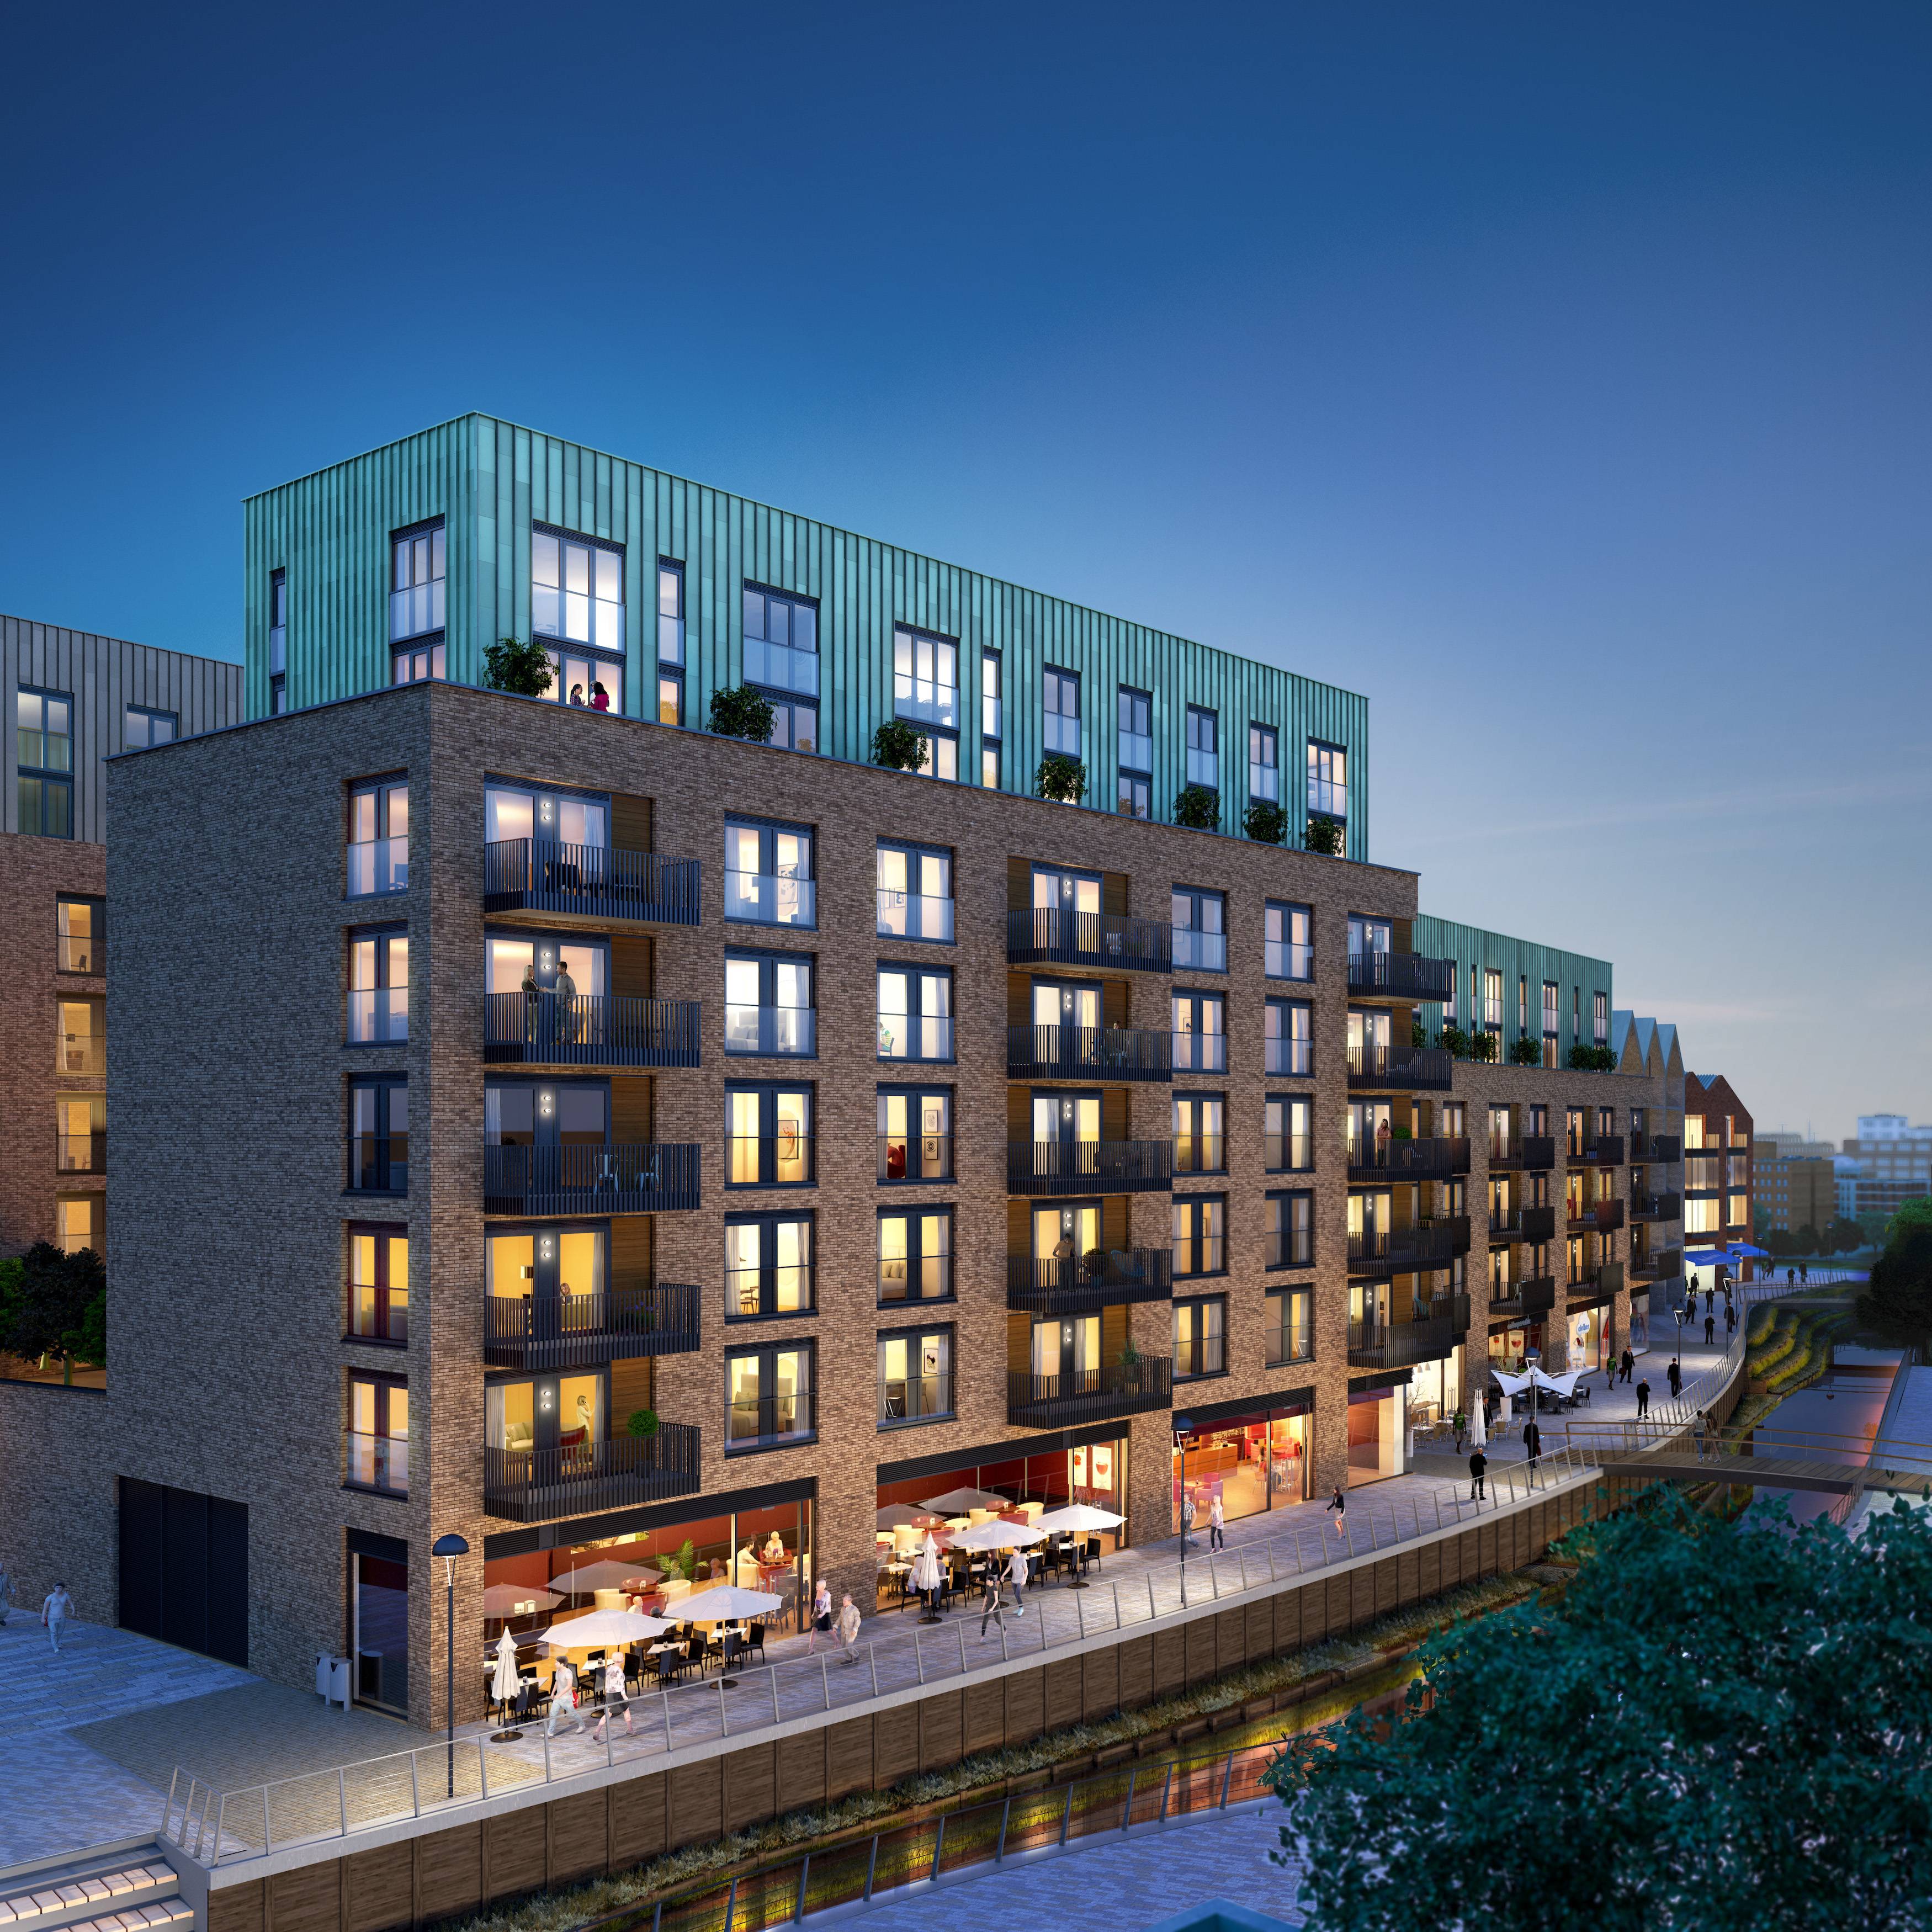 2 Bedroom Flat For Sale In Stunning New Build Apartments in The Ram Quarter,London, SW18